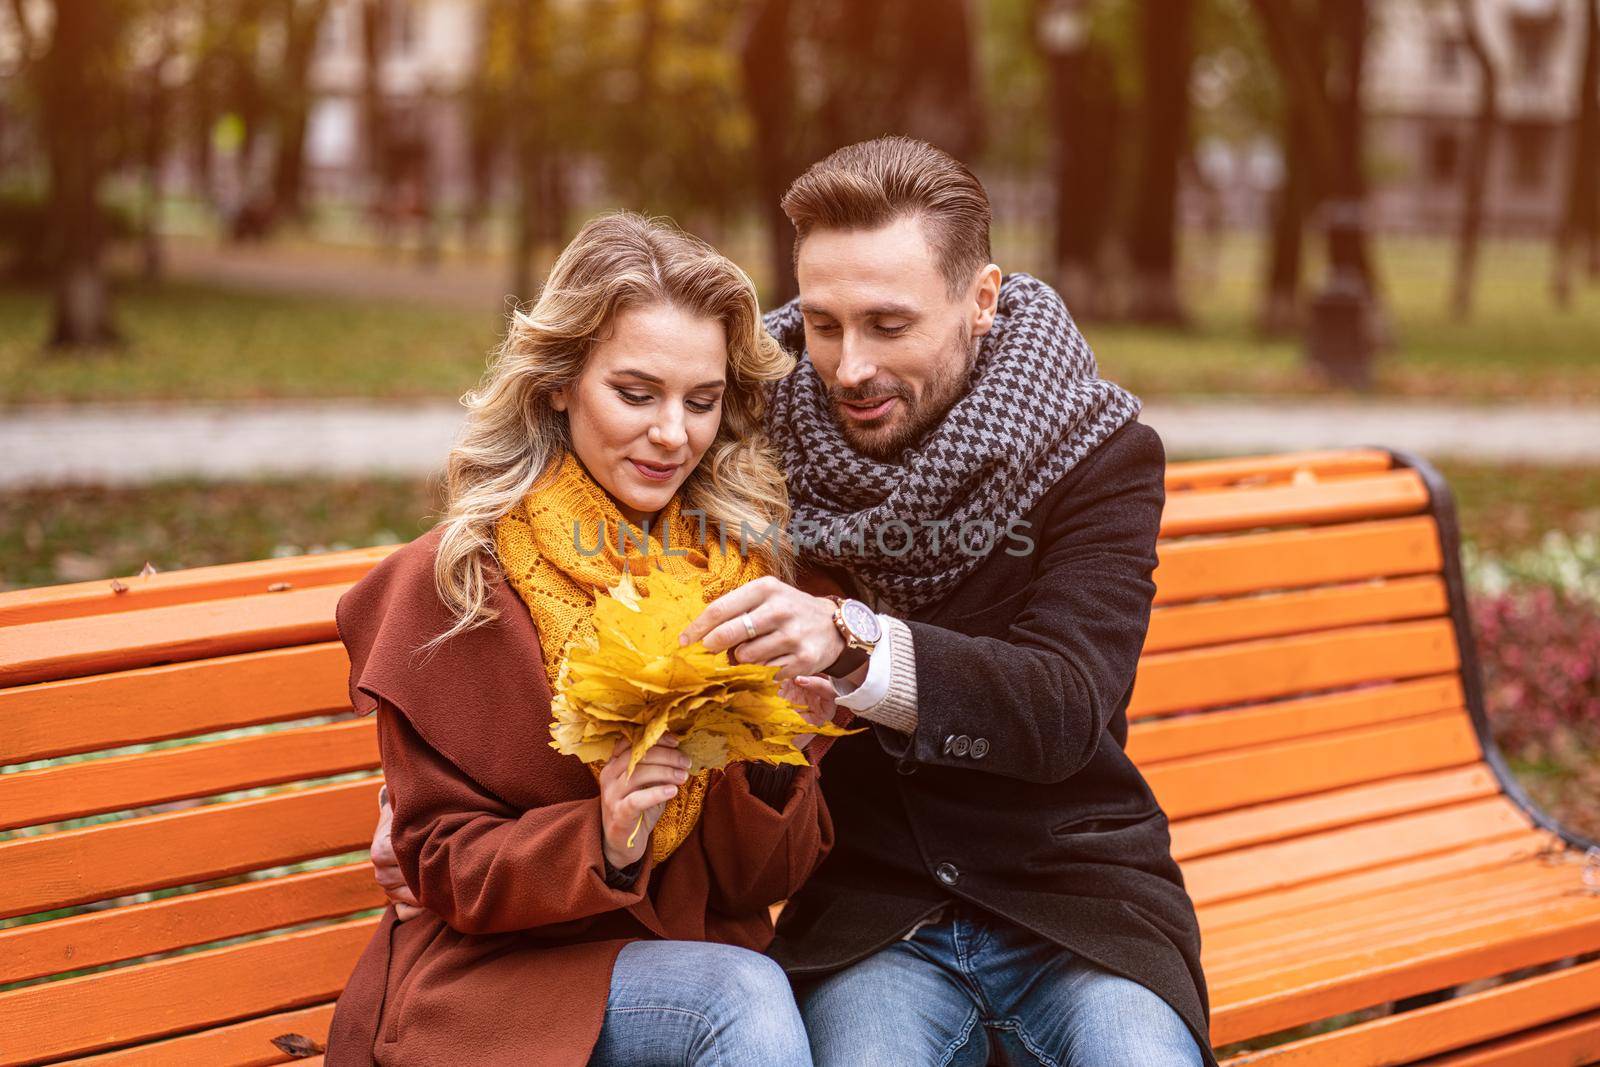 Embracing happy couple sitting gently romantic hugged on a bench in park wearing coats and scarfs Collecting a bouquet of fallen leaves. Love story concept.